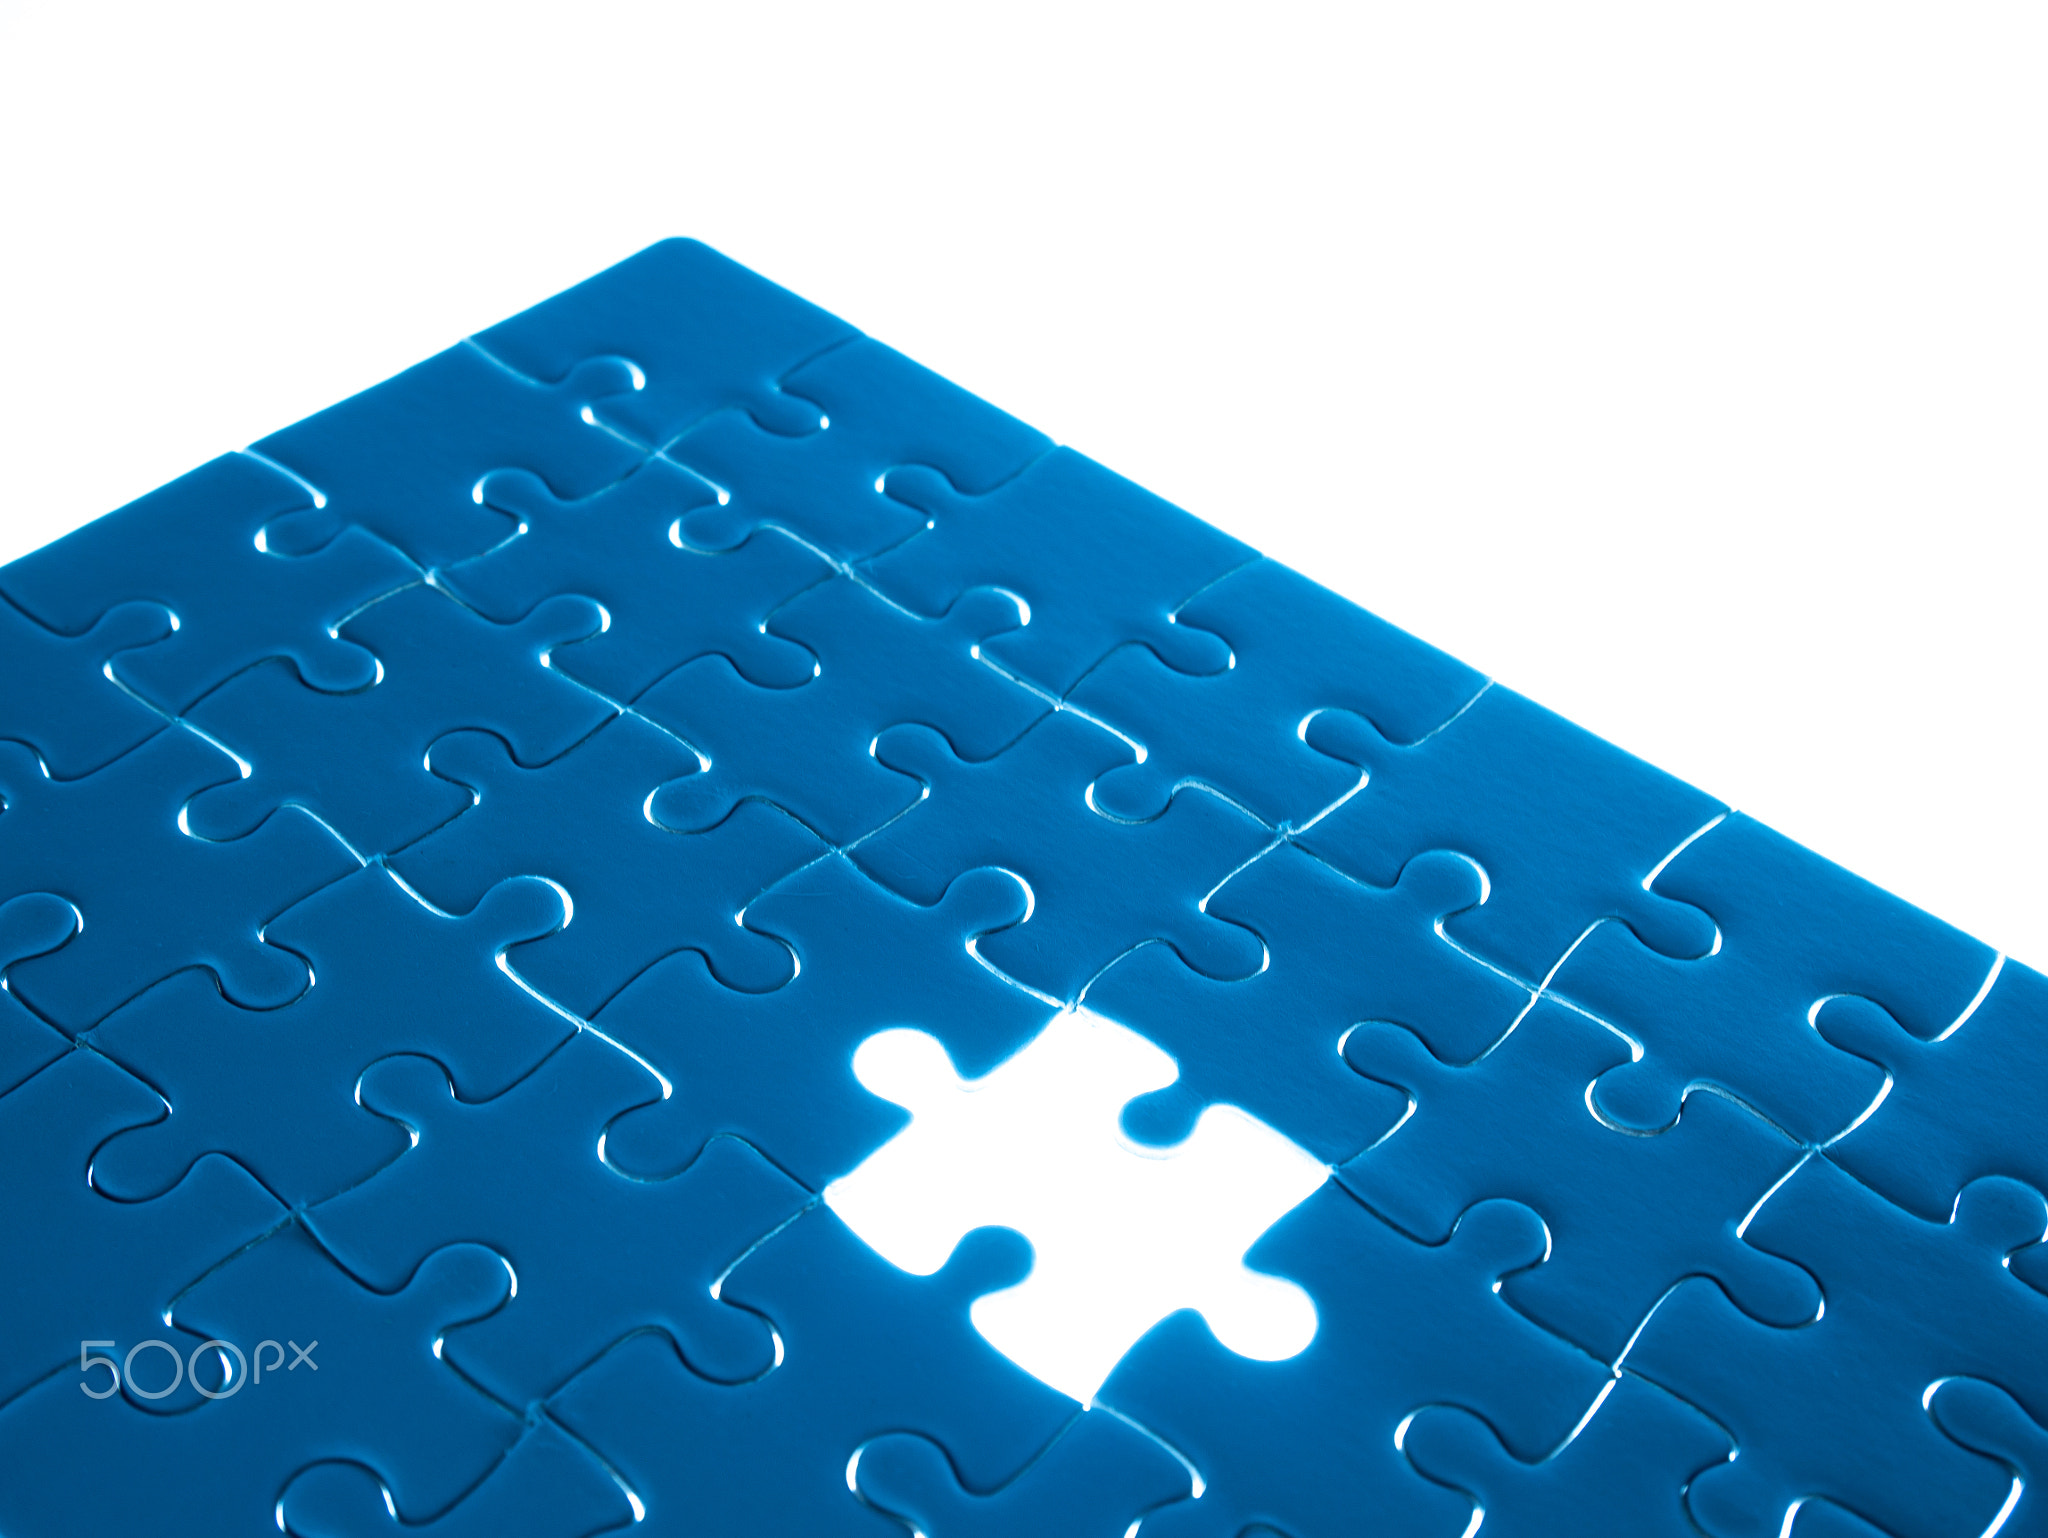 Missing Jigsaw puzzle piece with lighting, business concept for